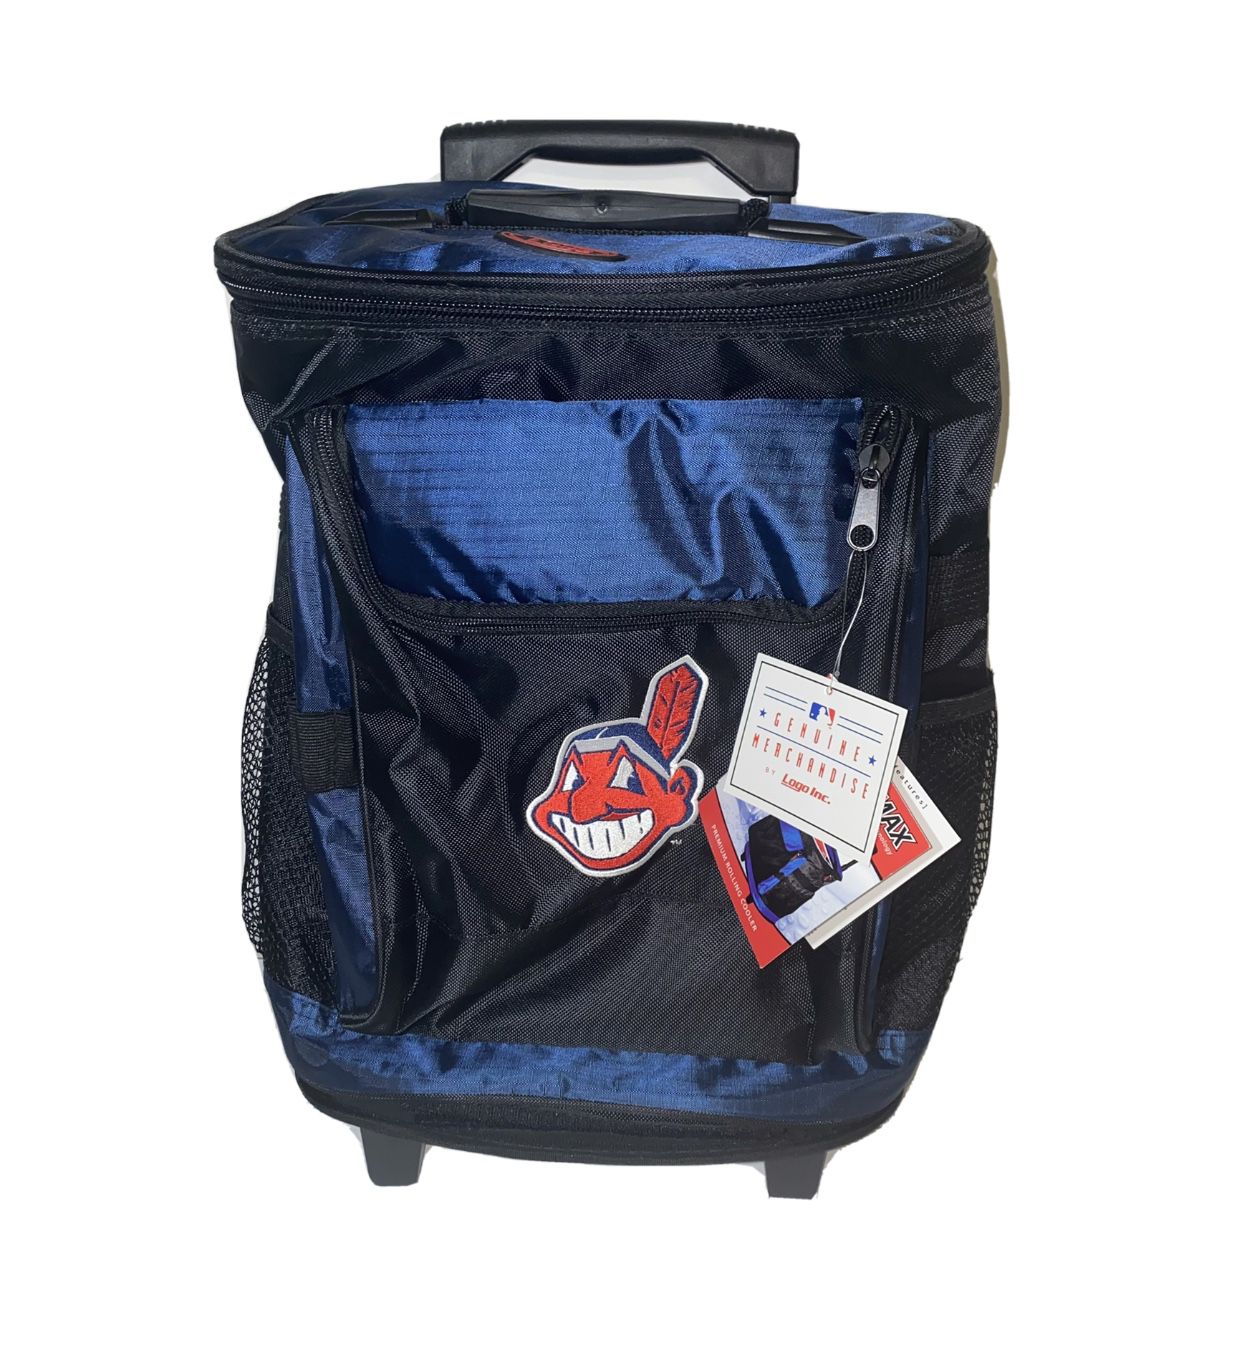 Rare-Cleveland Indians Baseball Rolling Backpack Insulated Cooler Chief Wahoo (holds 24 12oz Cans)